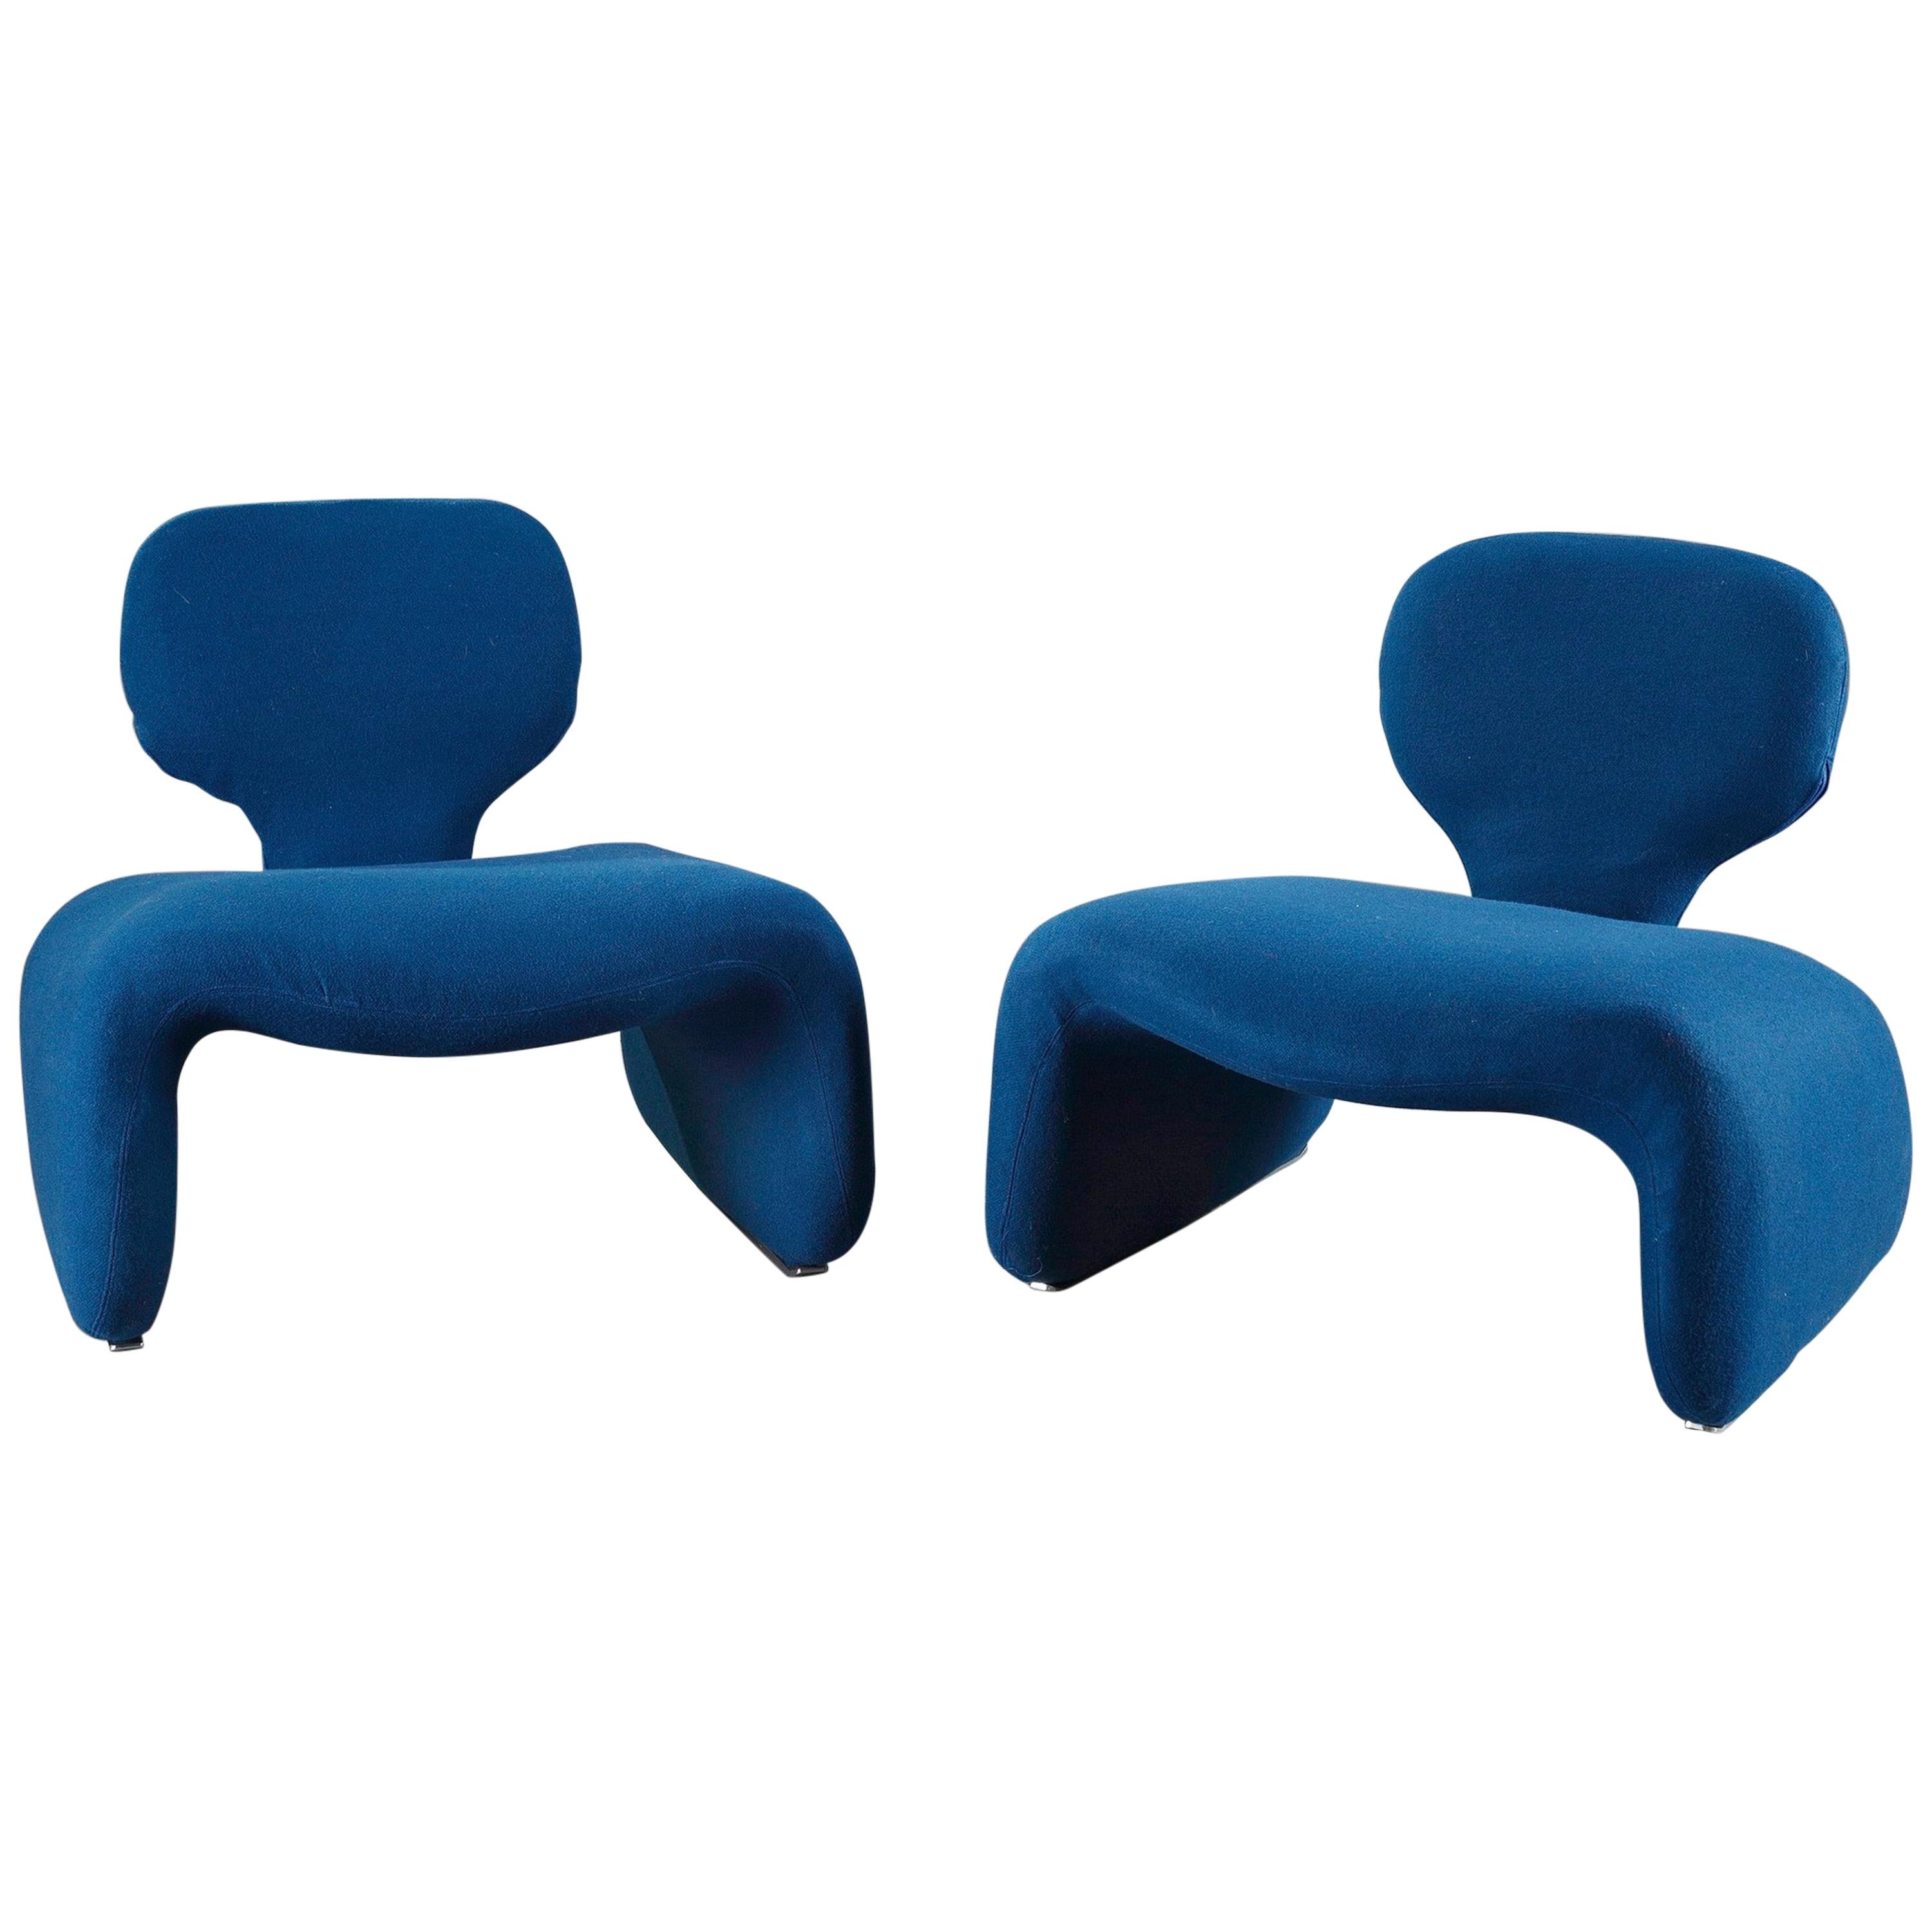 Pair of Vintage Blue Djinn Chairs by Olivier Mourgue for Airborne